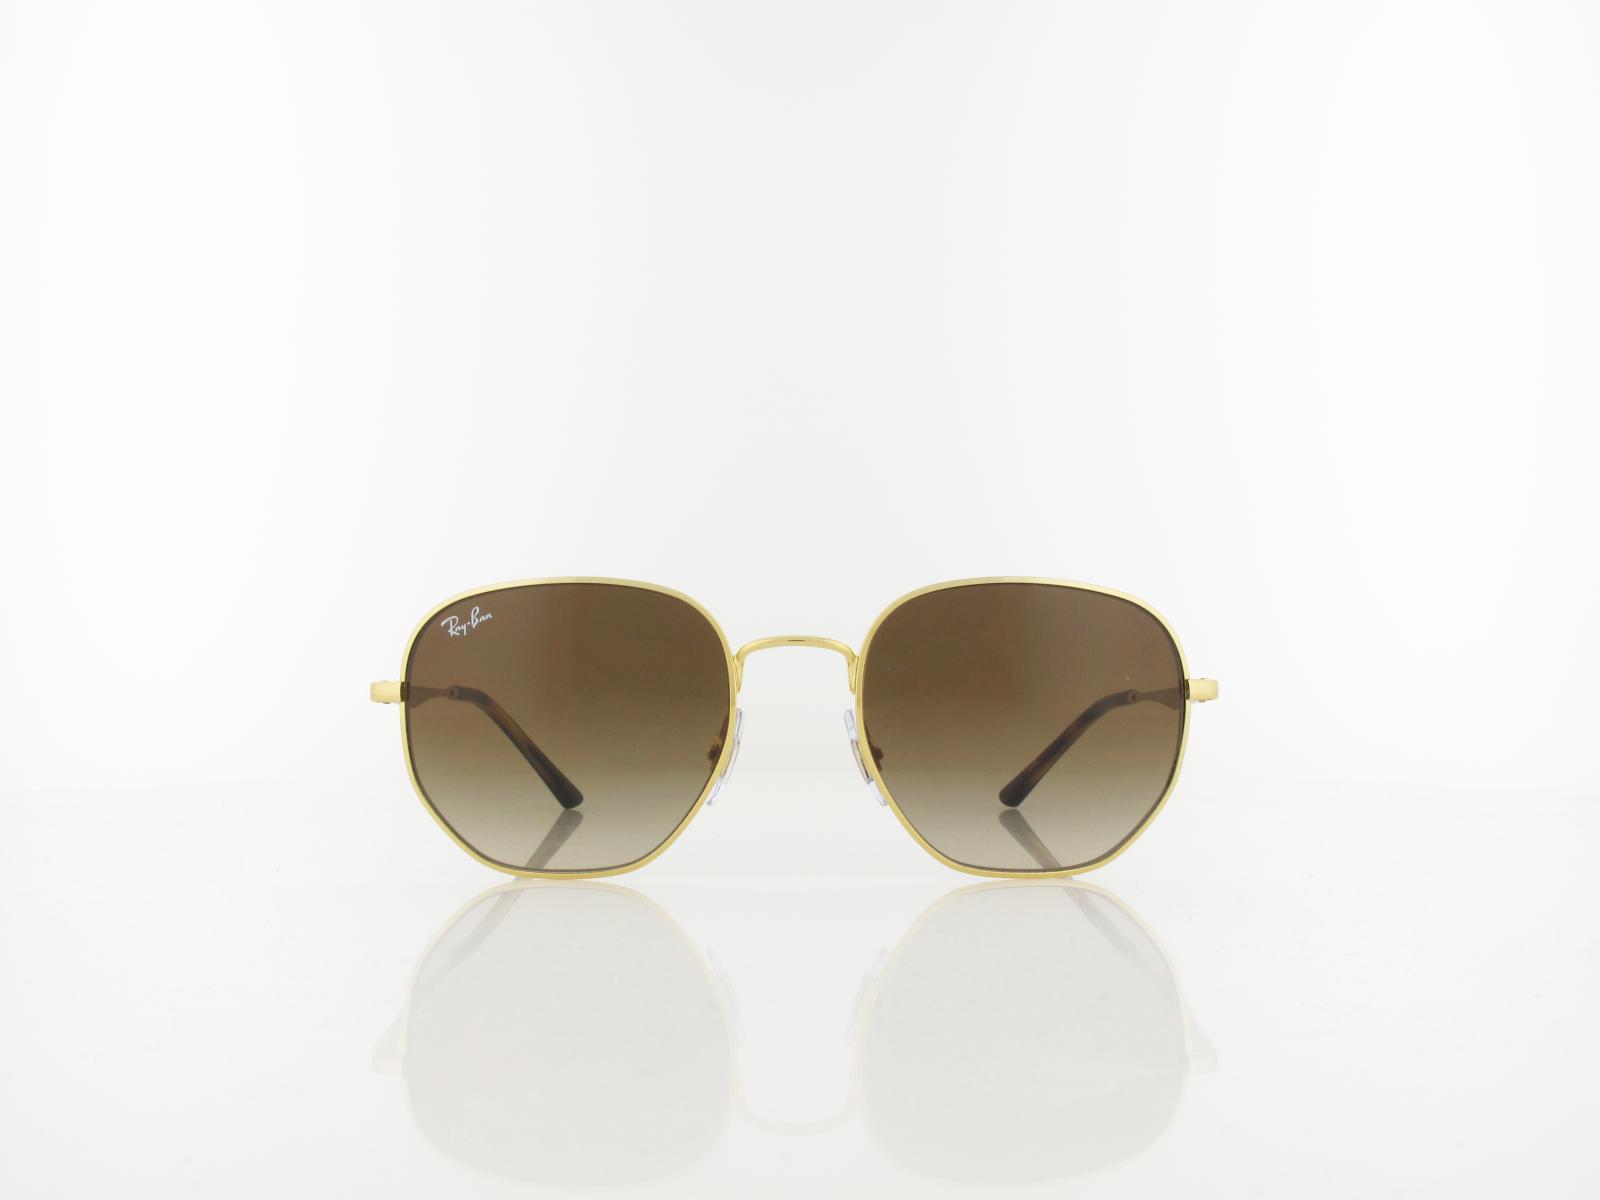 Ray Ban | RB3682 001/13 51 | arista / gradient brown